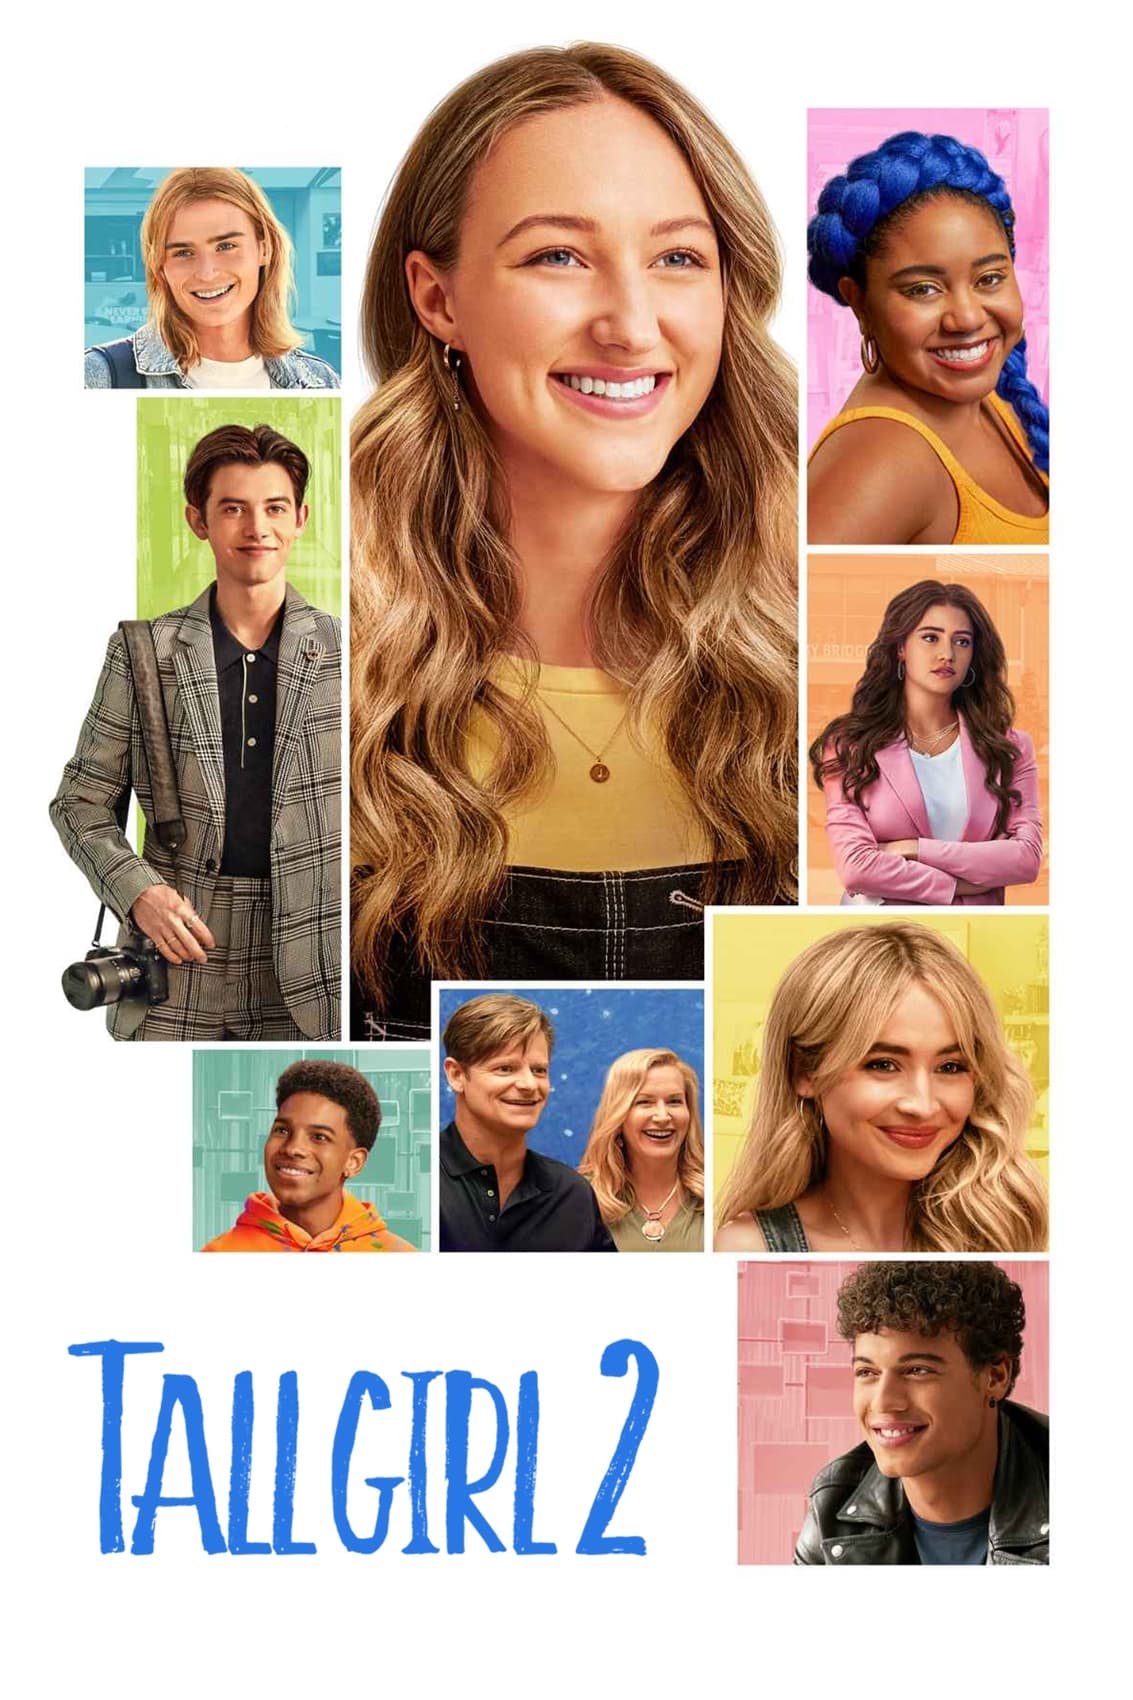 Poster for the movie "Tall Girl 2"